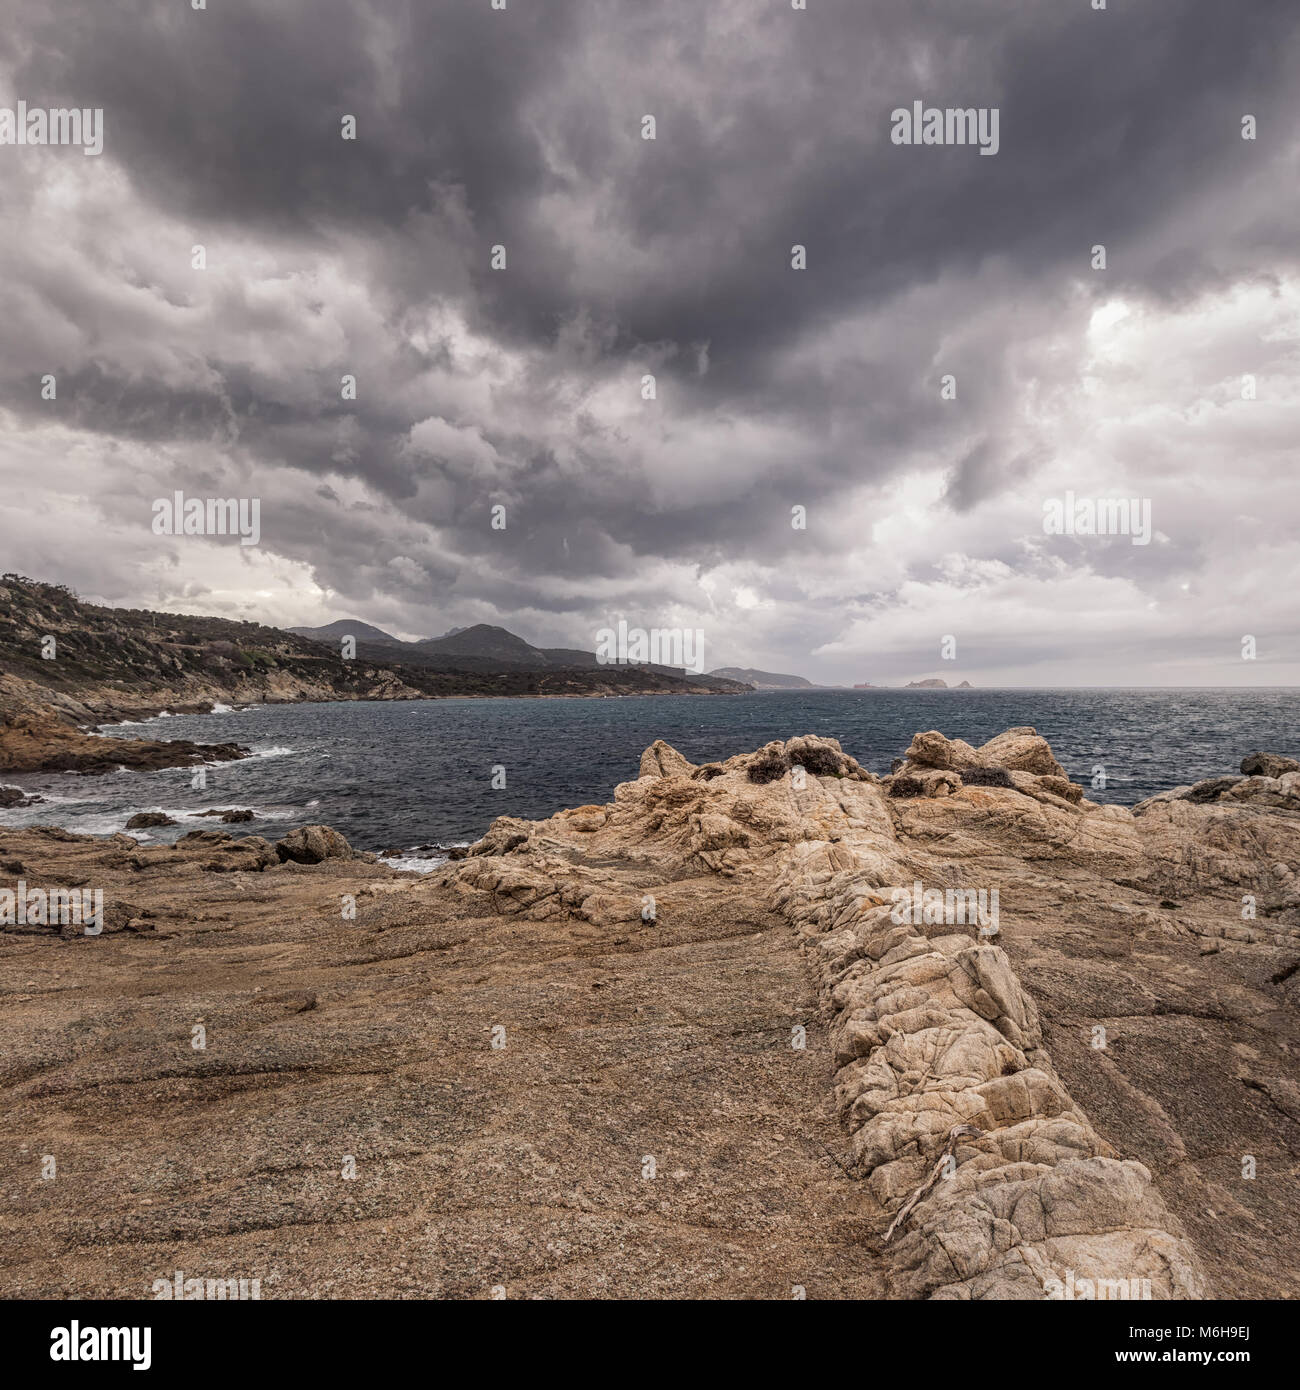 A line of rock striations on the coast of Corsica with Ile Rousse in the distance under dark storm clouds Stock Photo